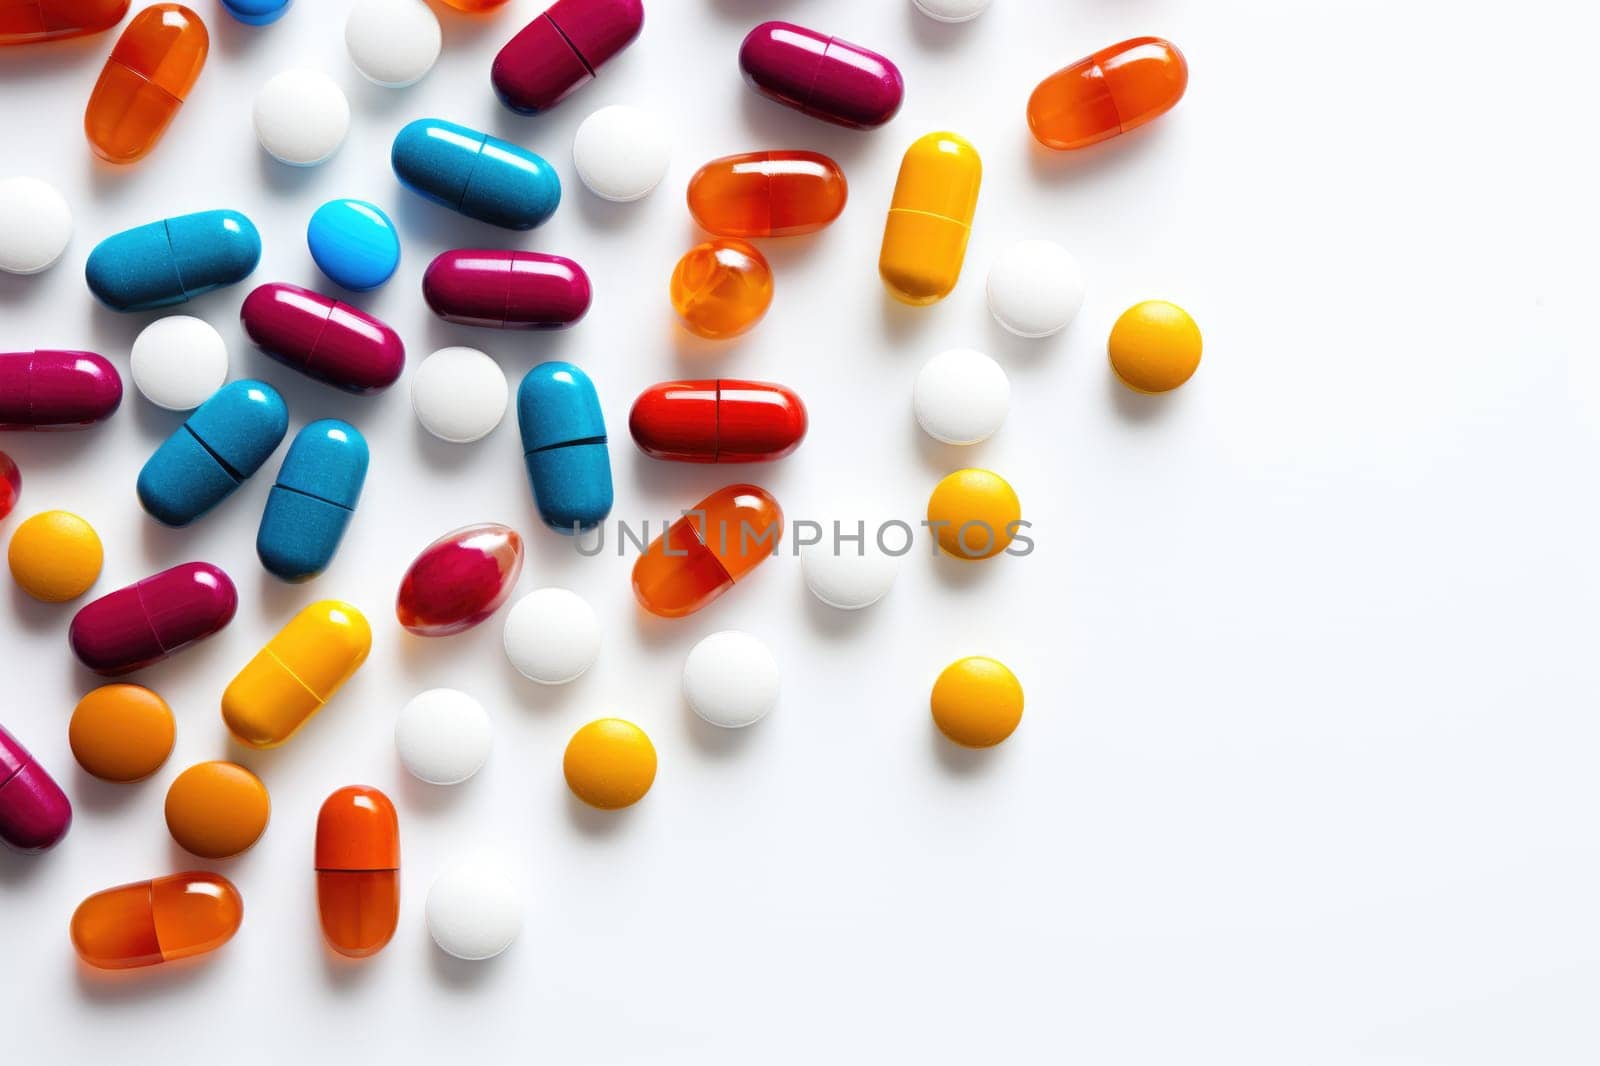 Different pills on white background, flat lay. Taking medications.